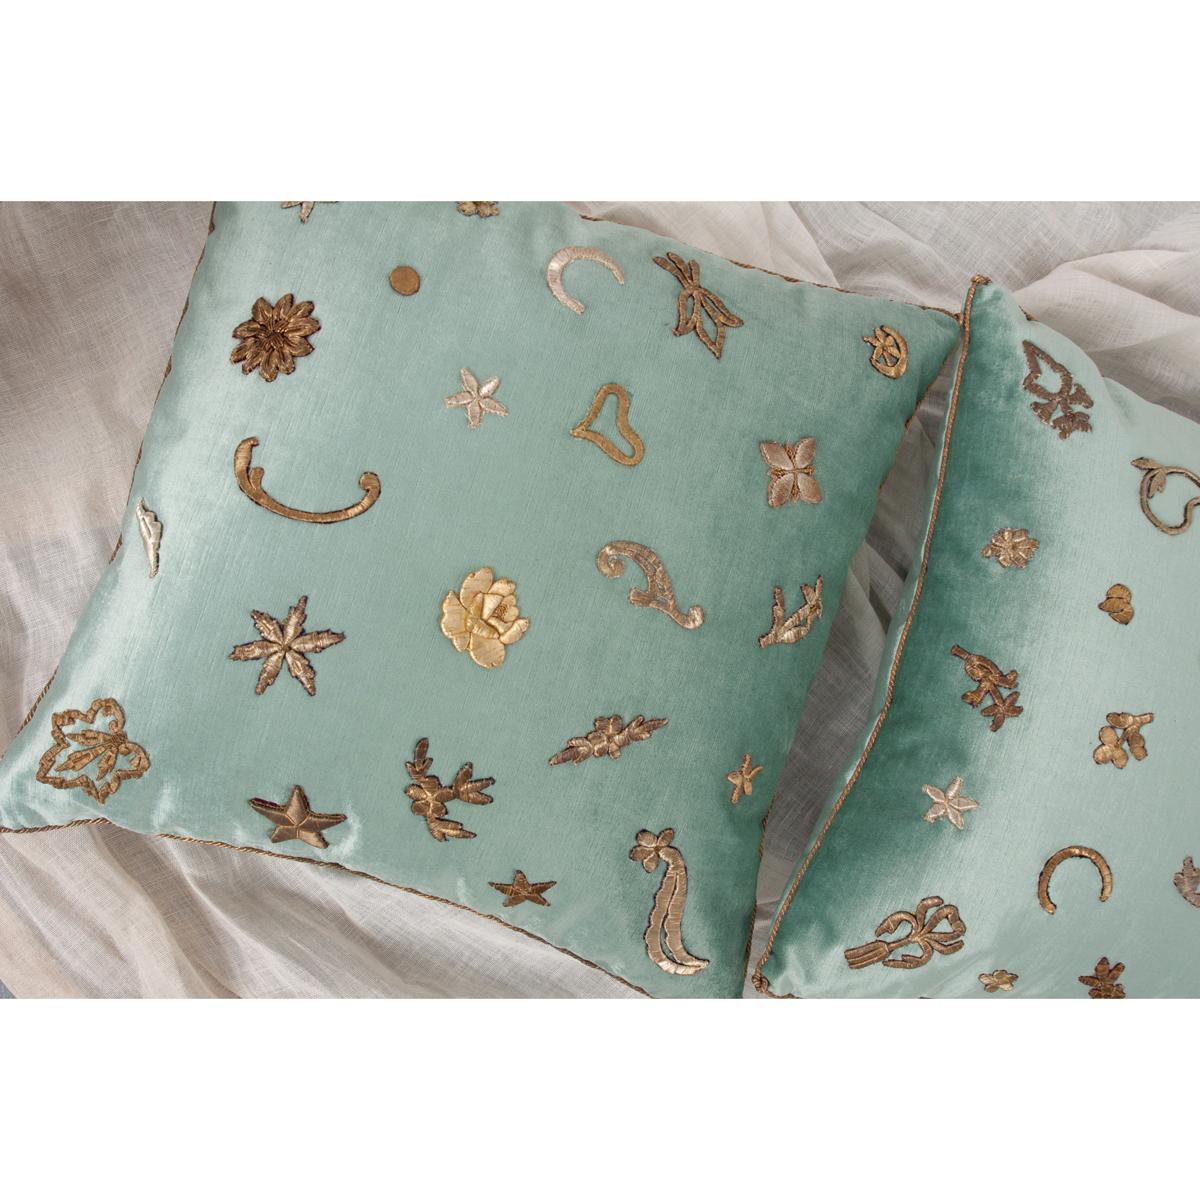 These pop art design pillows have antique raised gold and silver, upcycled metallic embroidery in a random pattern on aqua velvet. Hand trimmed with vintage gold metallic cording, knotted in the corners. Down filled.